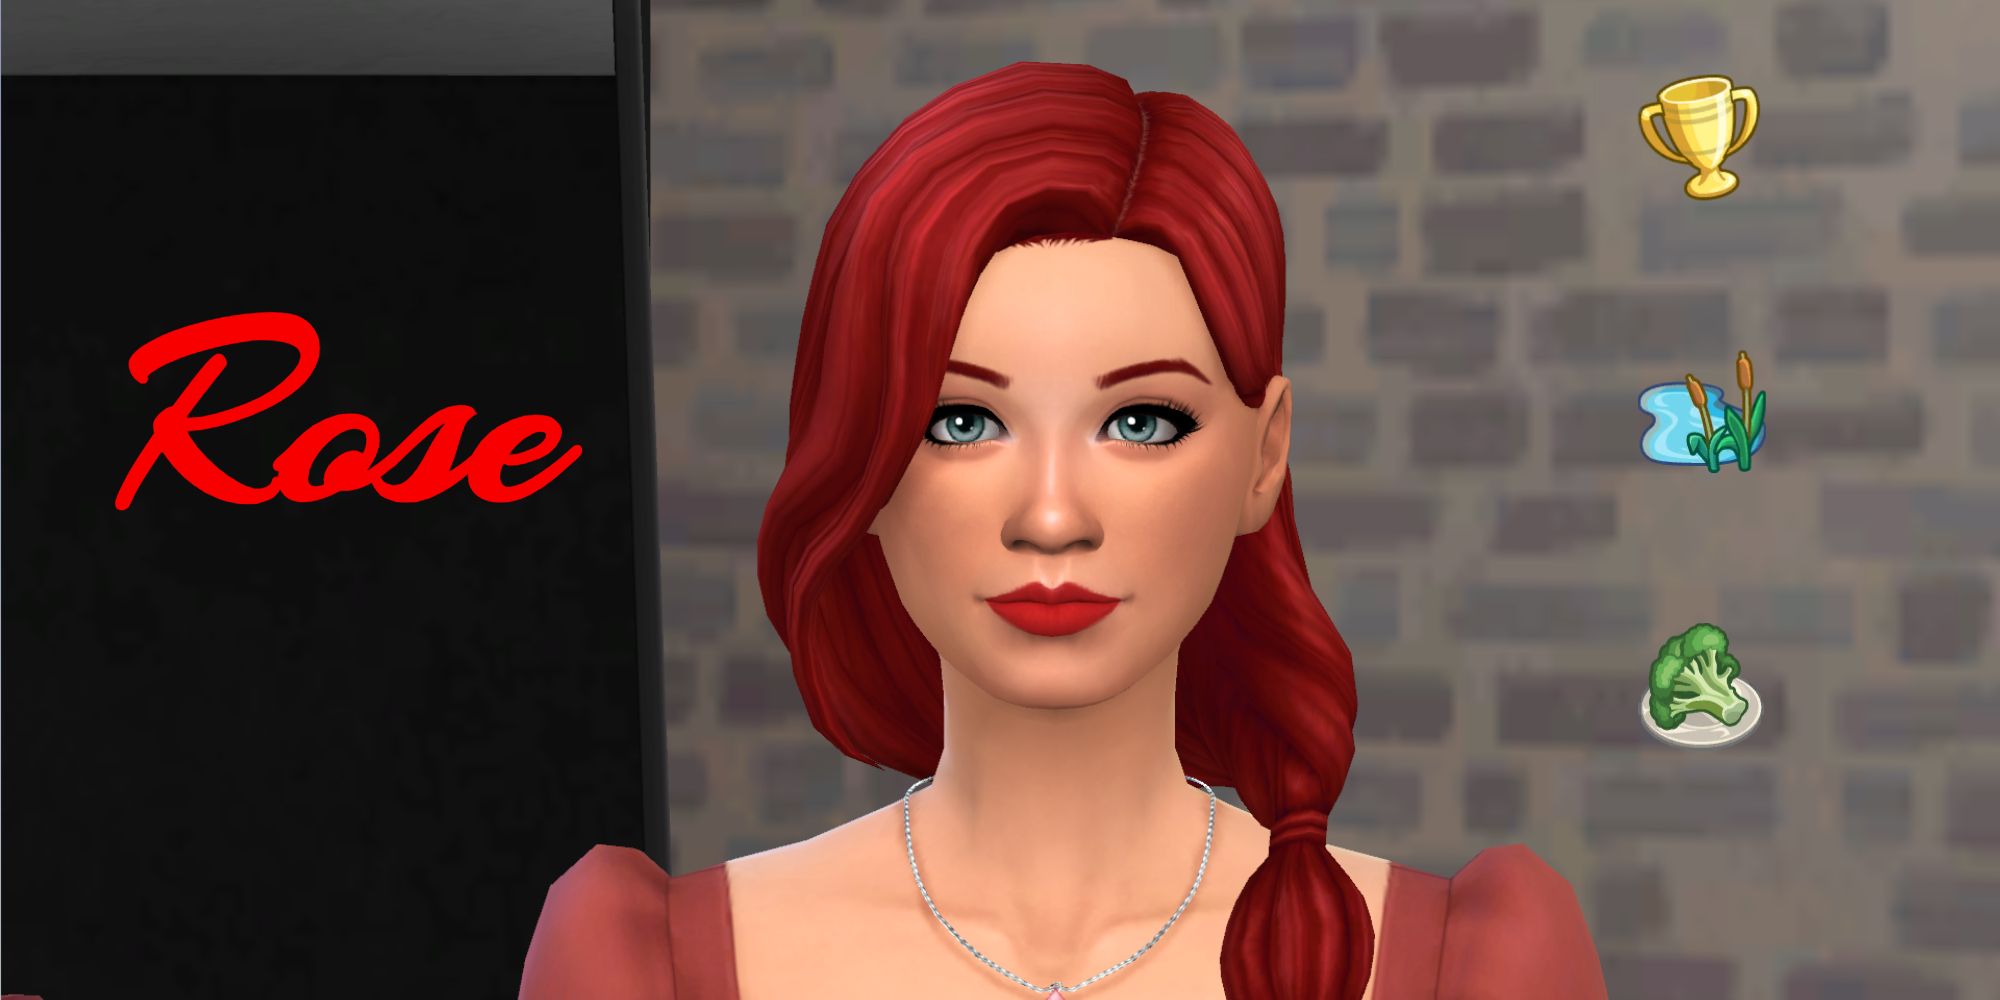 A red-headed Sim from the rose generation